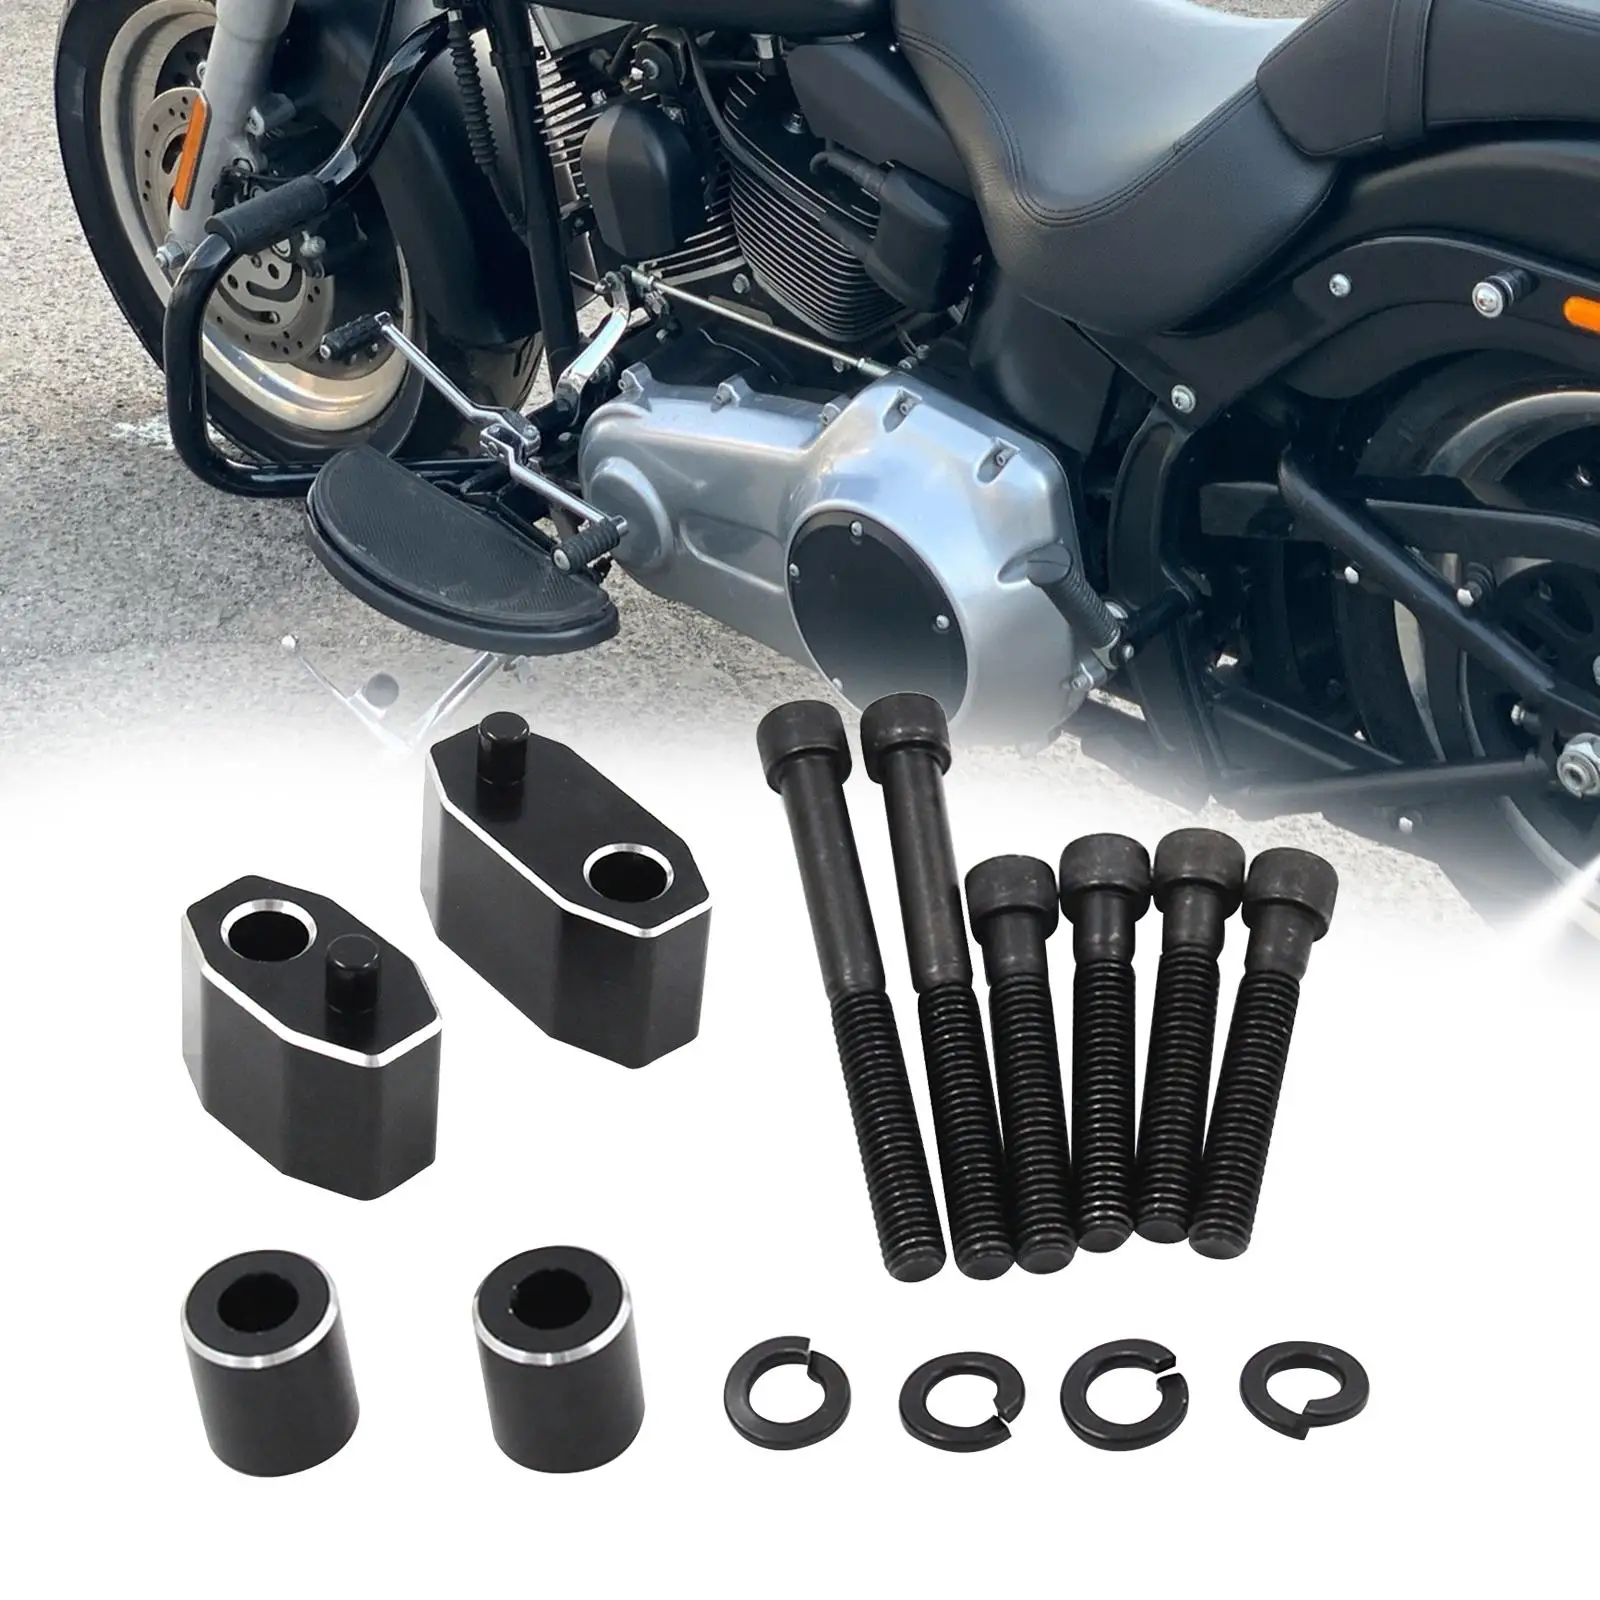 Street Glide Floorboard Extension with Mounting Screws Easily Install Stable